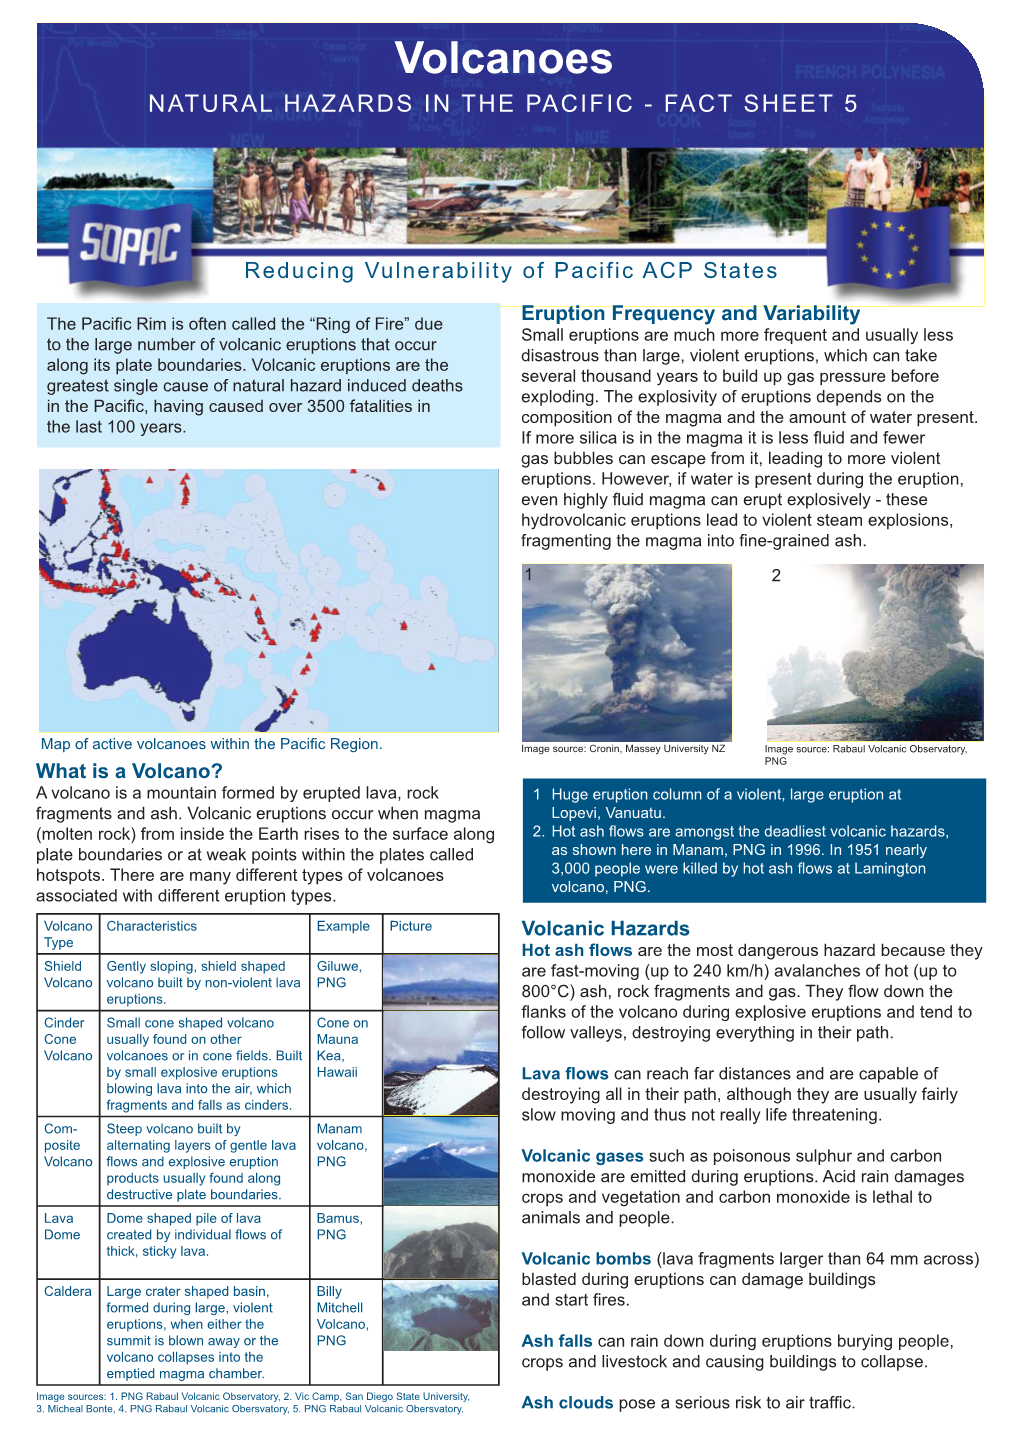 Volcanoes NATURAL HAZARDS in the PACIFIC - FACT SHEET 5